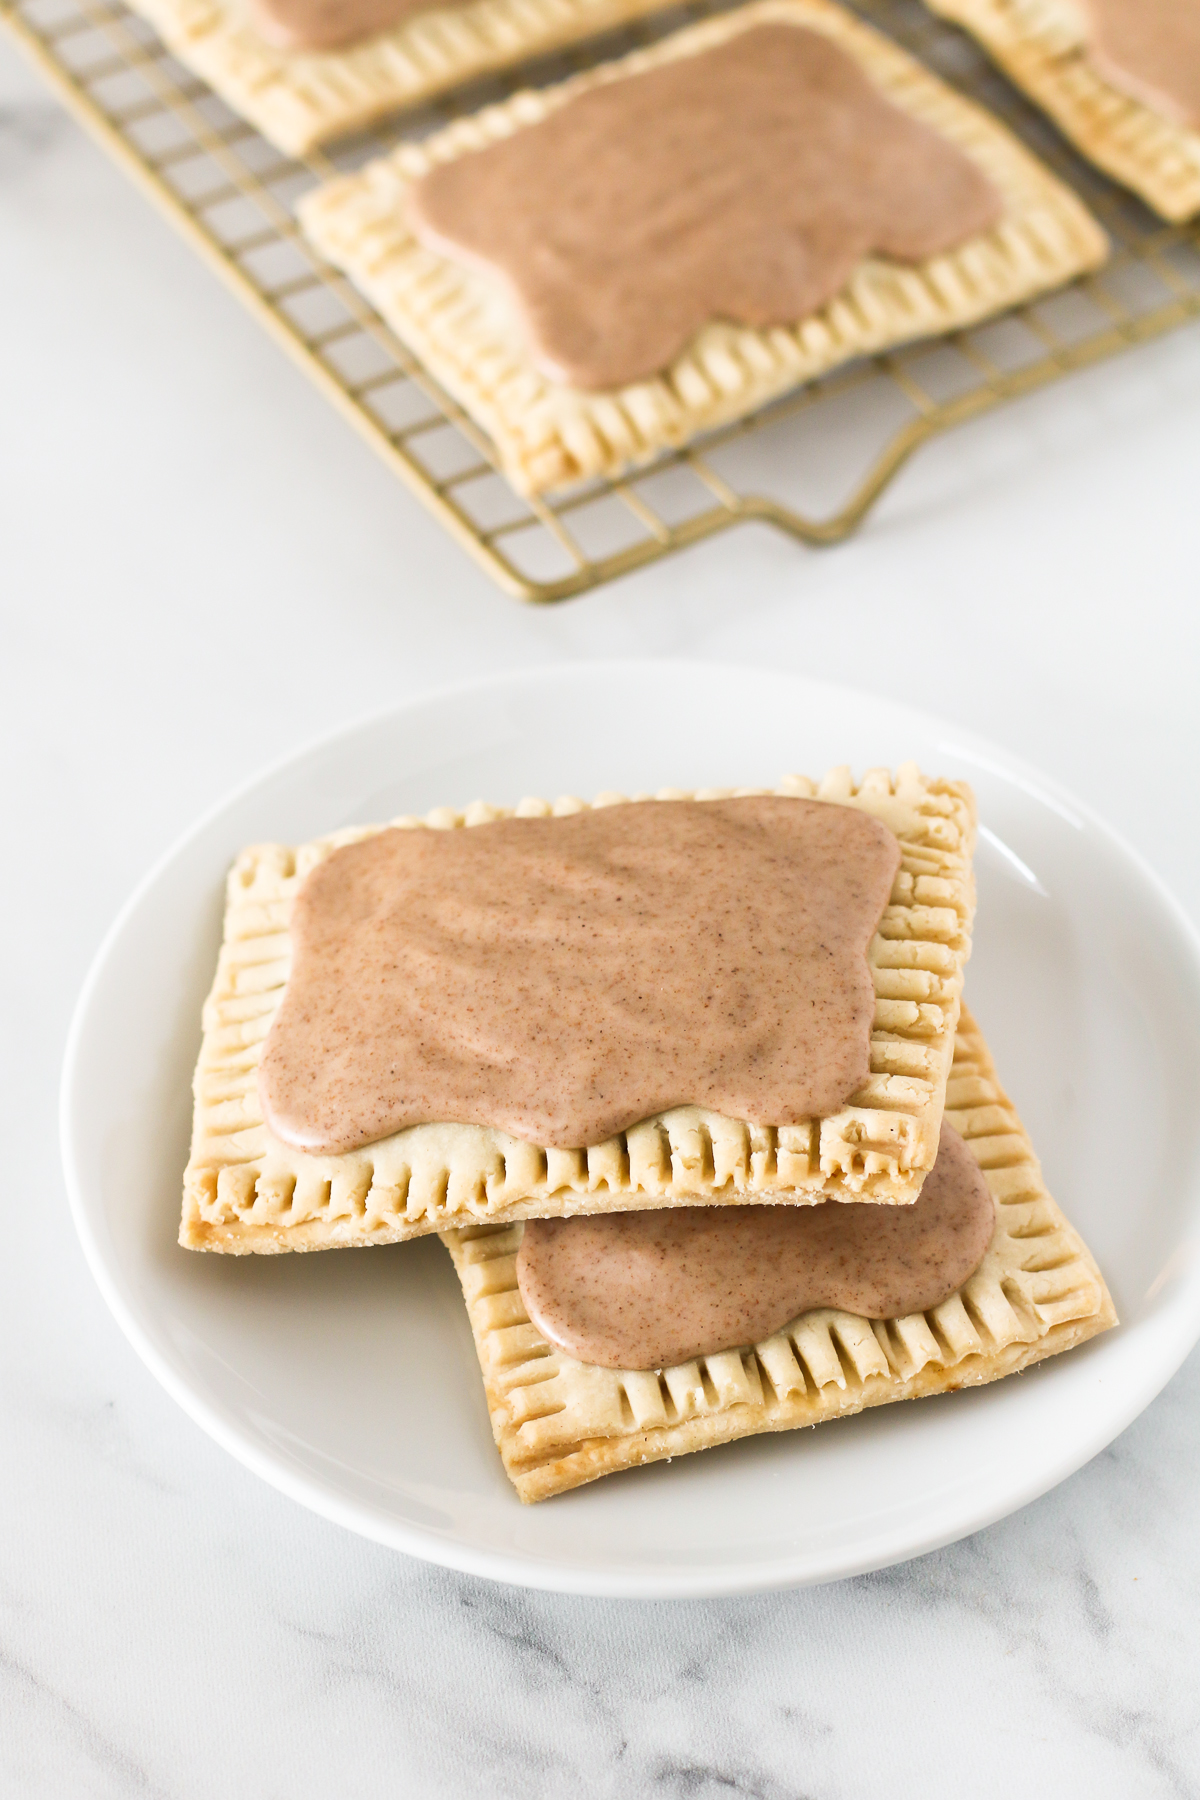 Gluten Free Vegan Brown Sugar Cinnamon Pop Tarts. Buttery pastry, with a cinnamon sugar filling and covered in a sweet cinnamon glaze. 